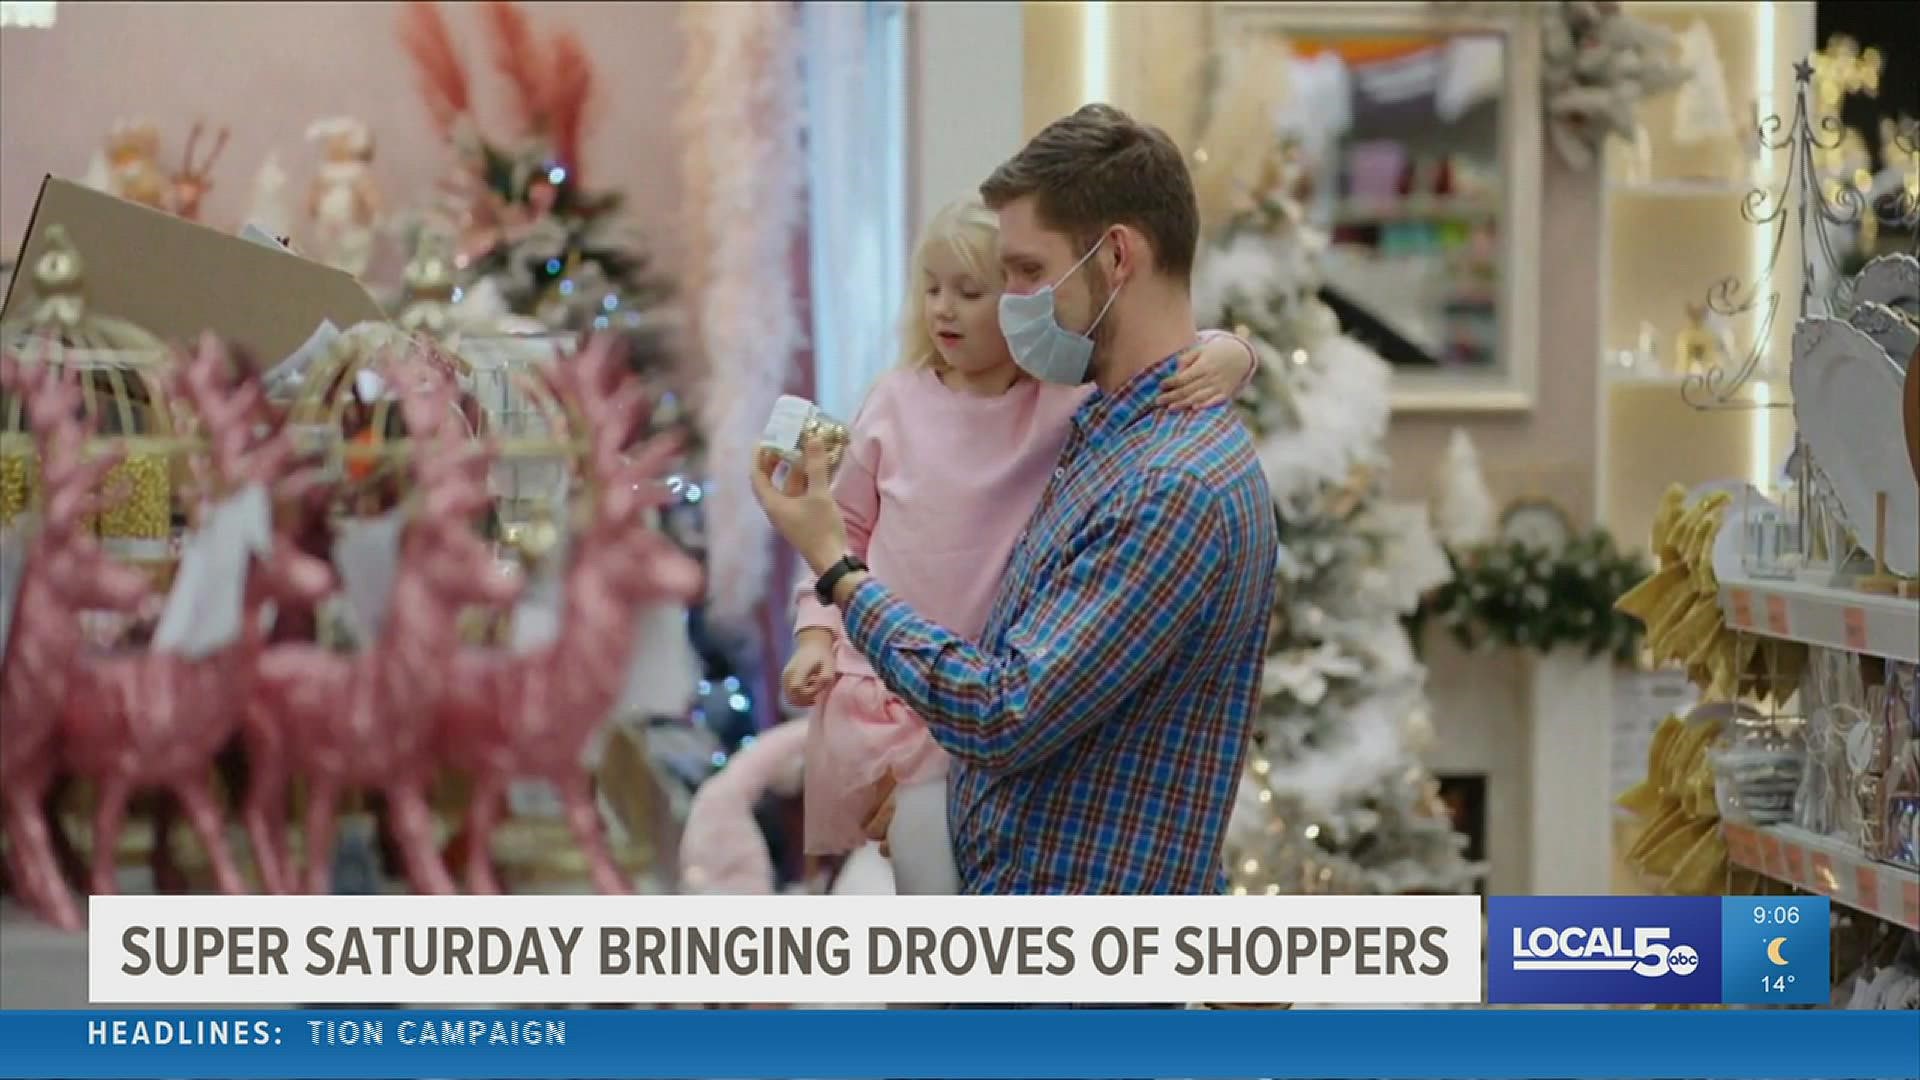 Super Saturday is considered one of the busiest shopping days of the year. This year, Christmas Eve comes on a Saturday, giving shoppers 8 days for the final push.